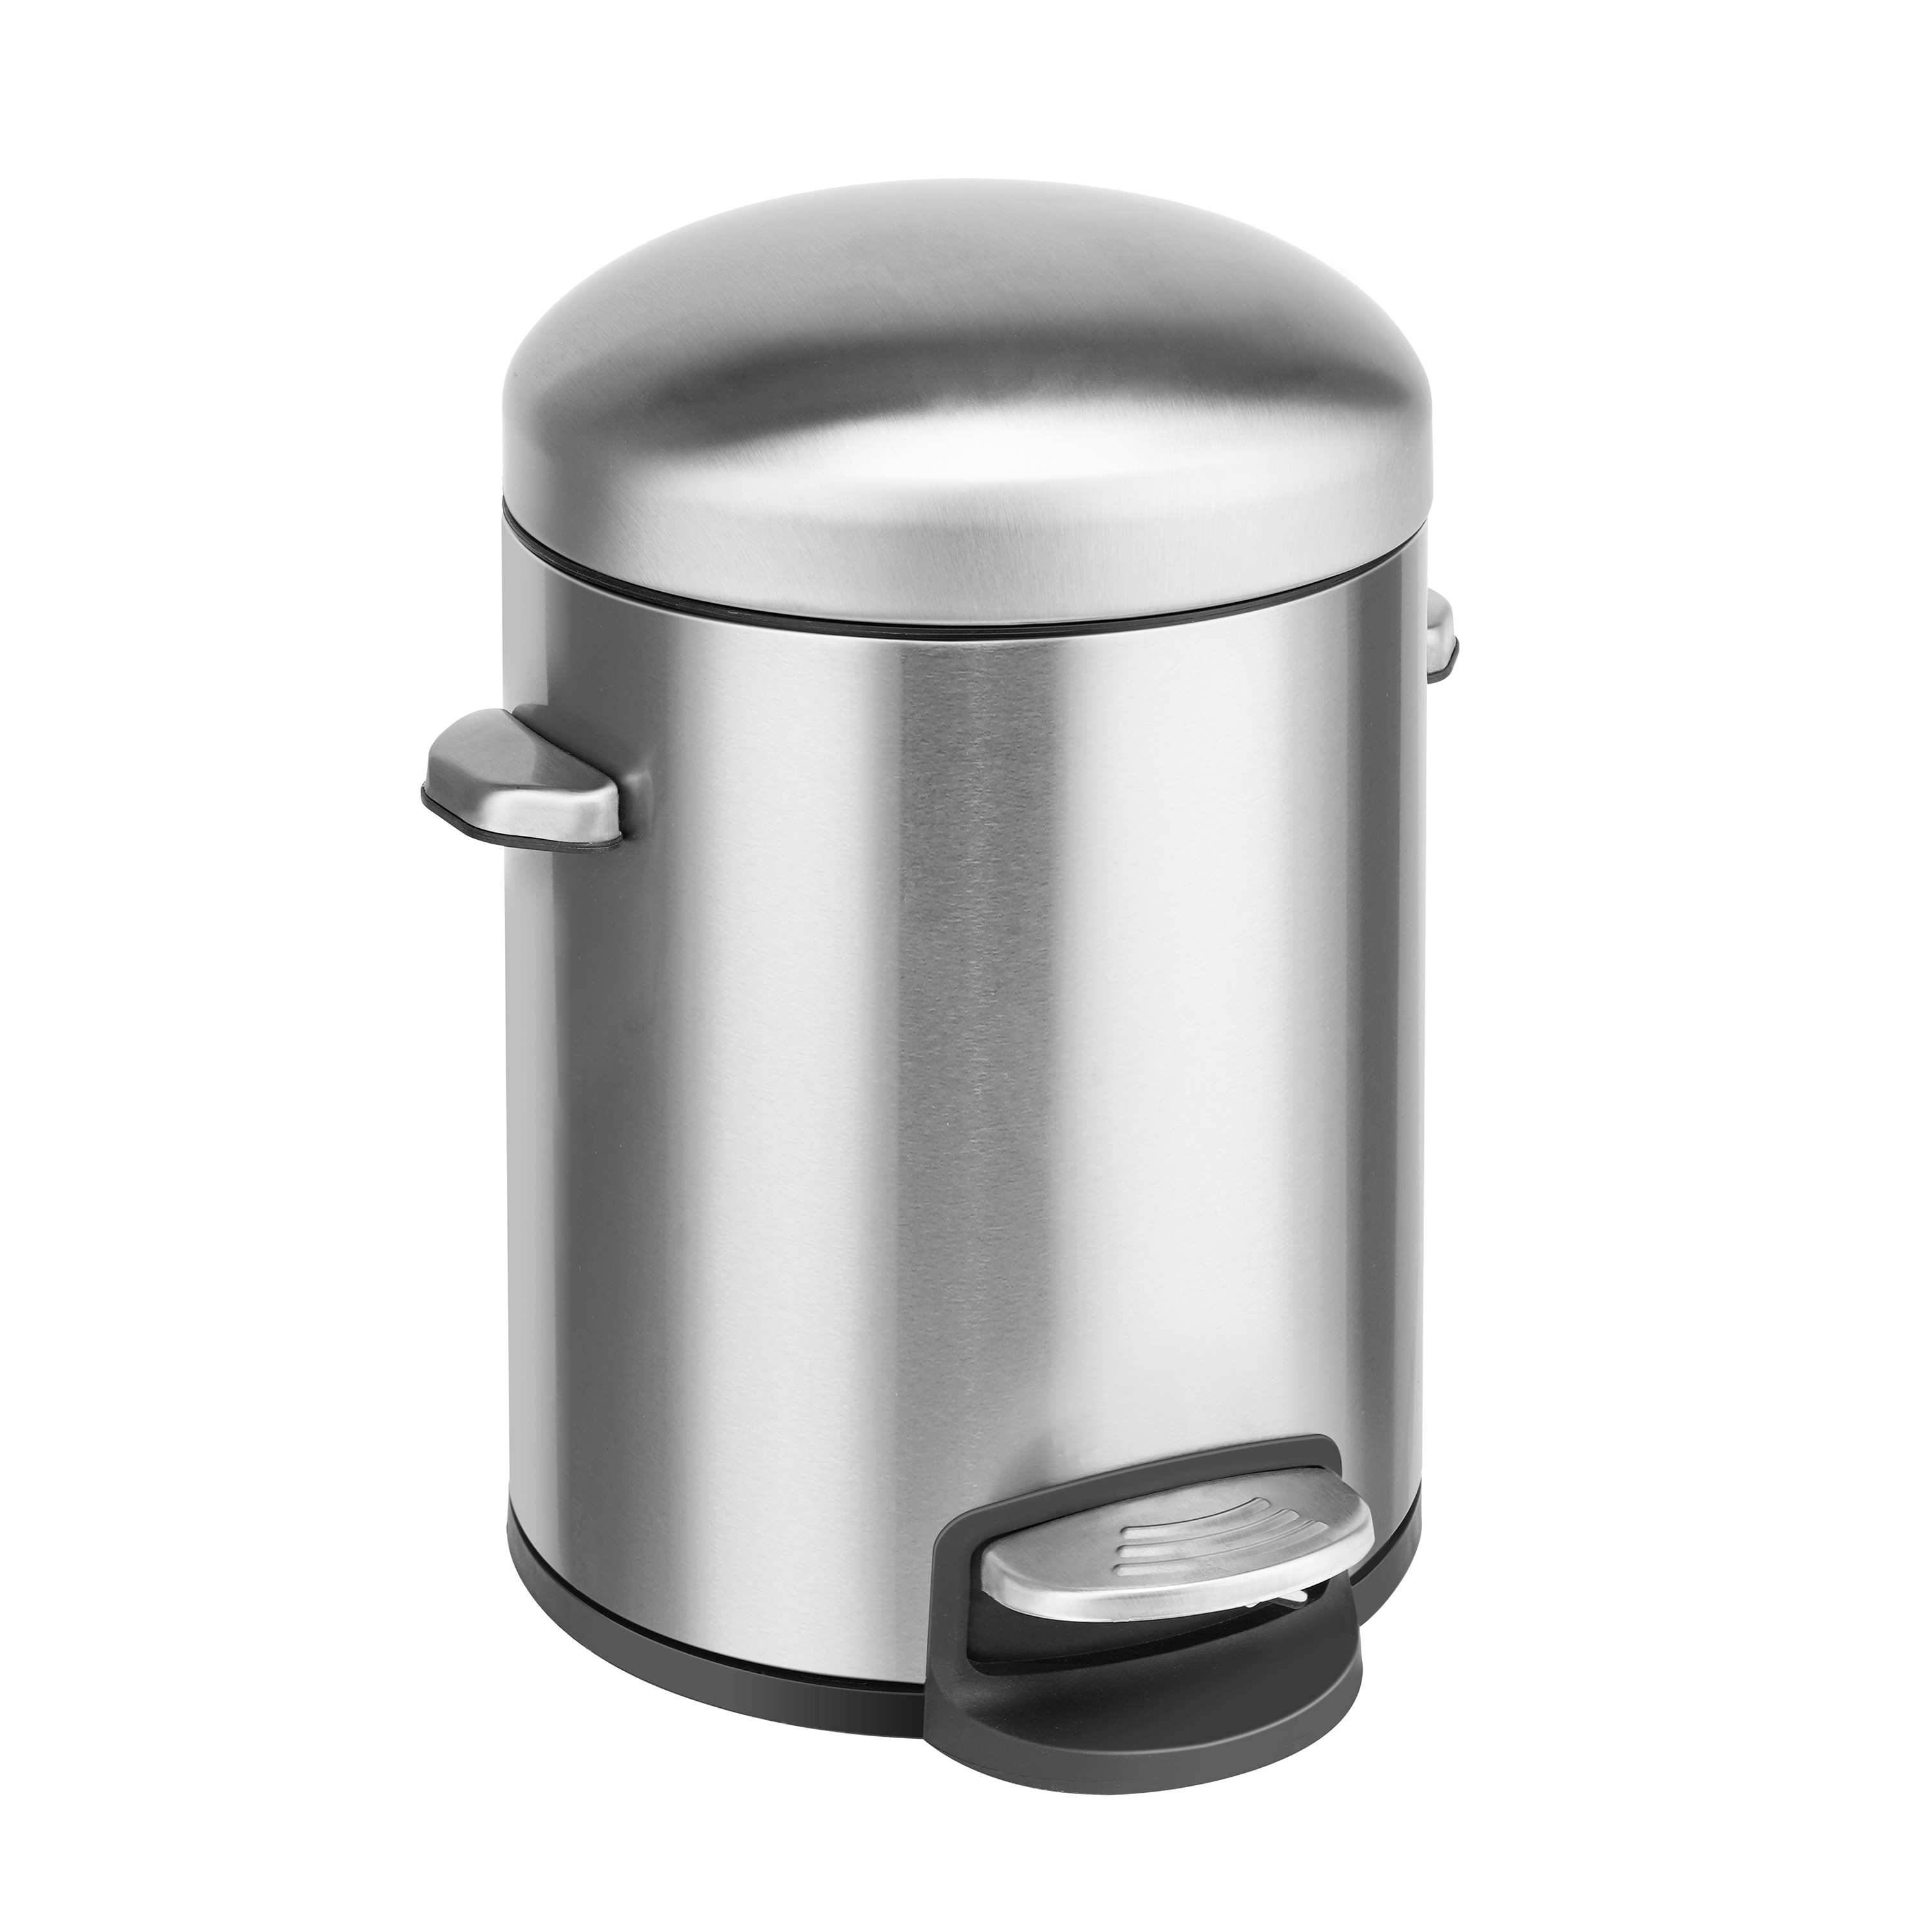 Office trash can stainless steel manufacturer